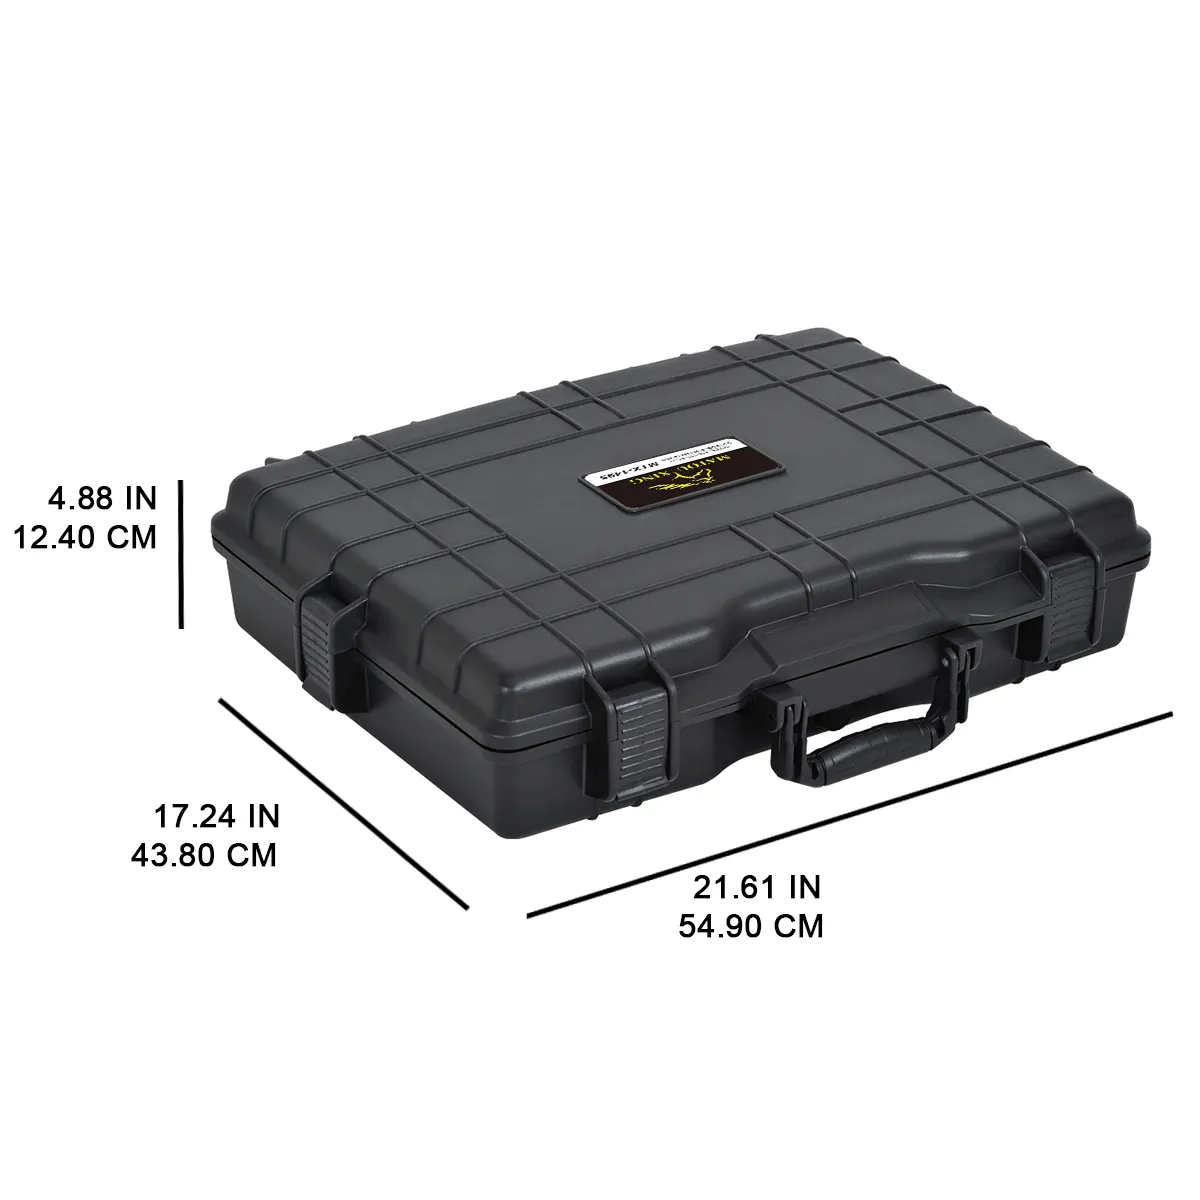 Waterproof Equipment Plastic Shockproof Carry Case Hard Case Box For Camera Laptop computer